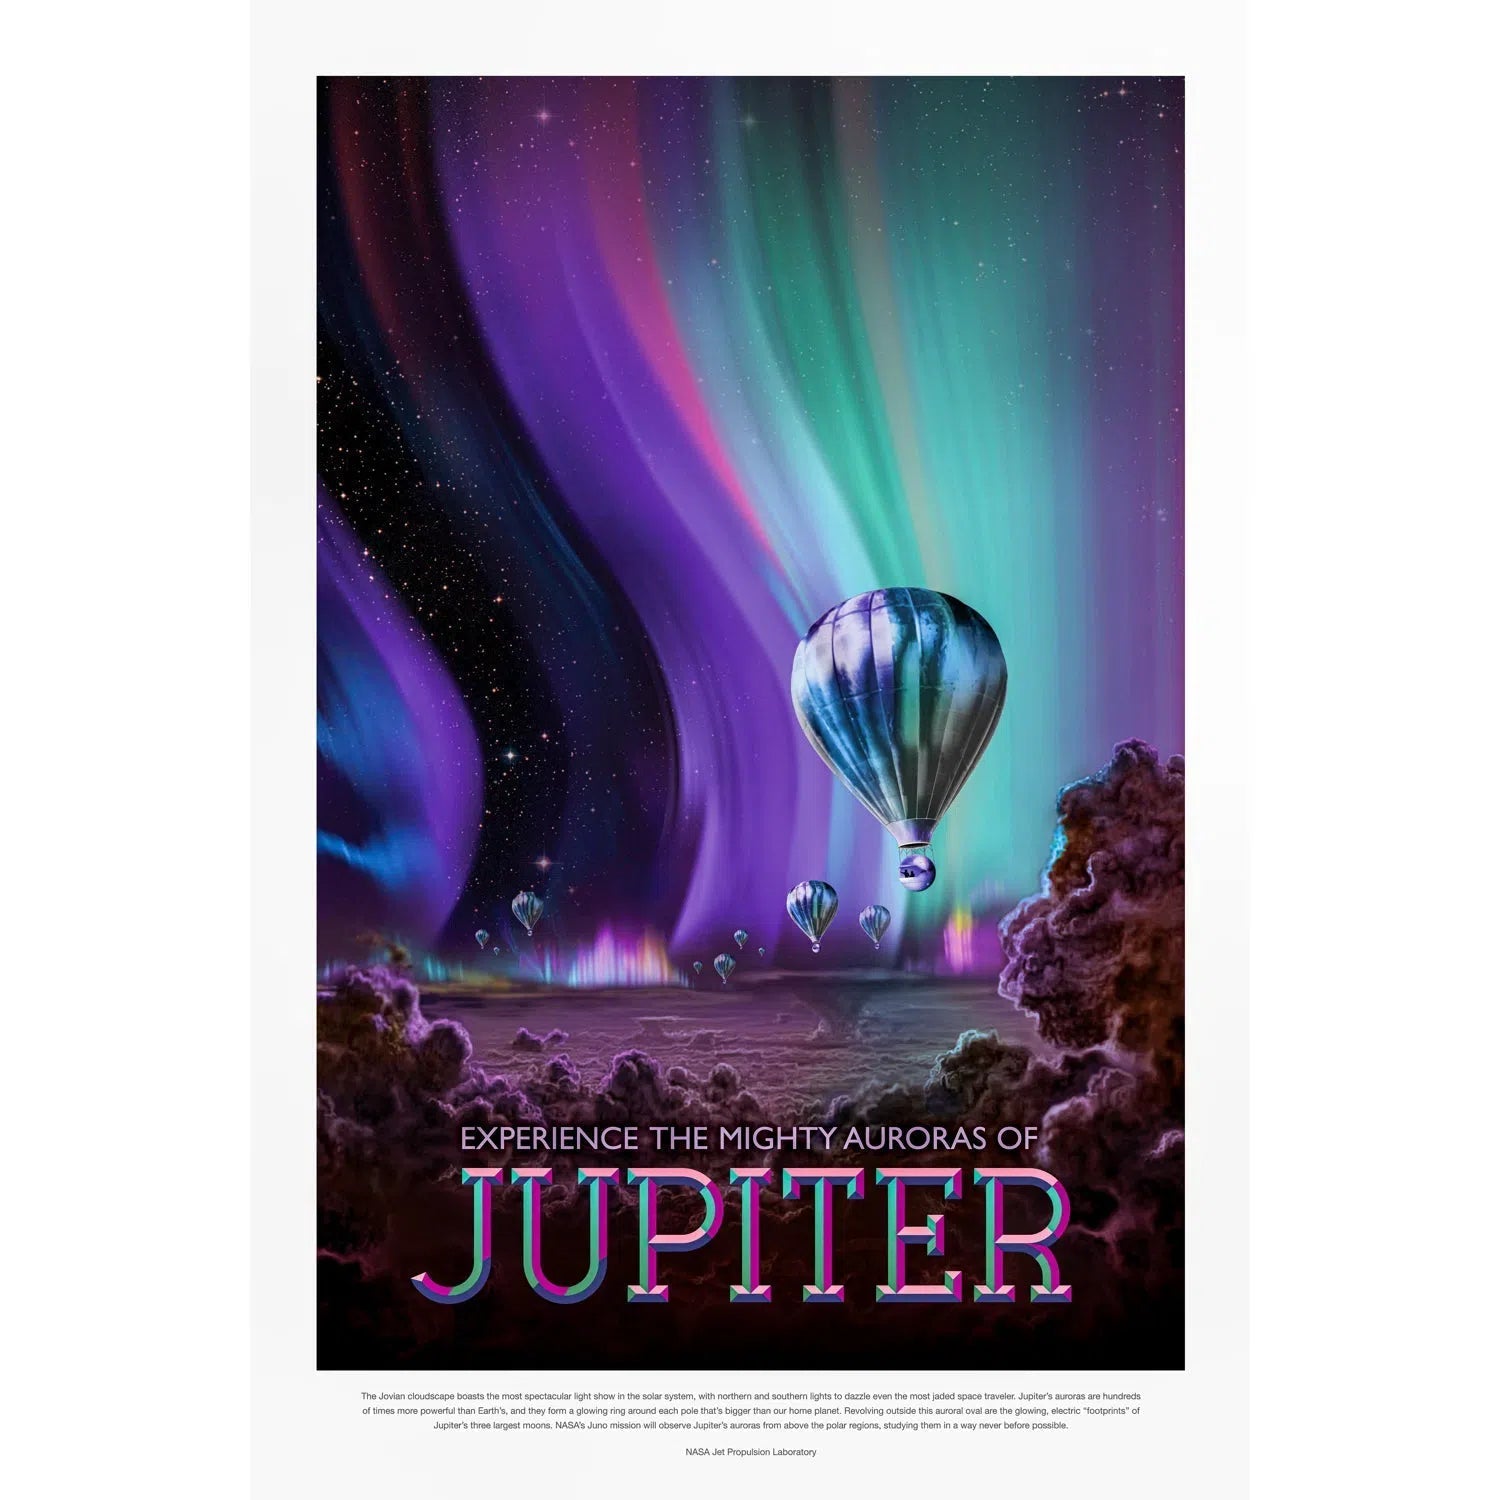 Experience the mighty aurora of Jupiter-Imagesdartistes